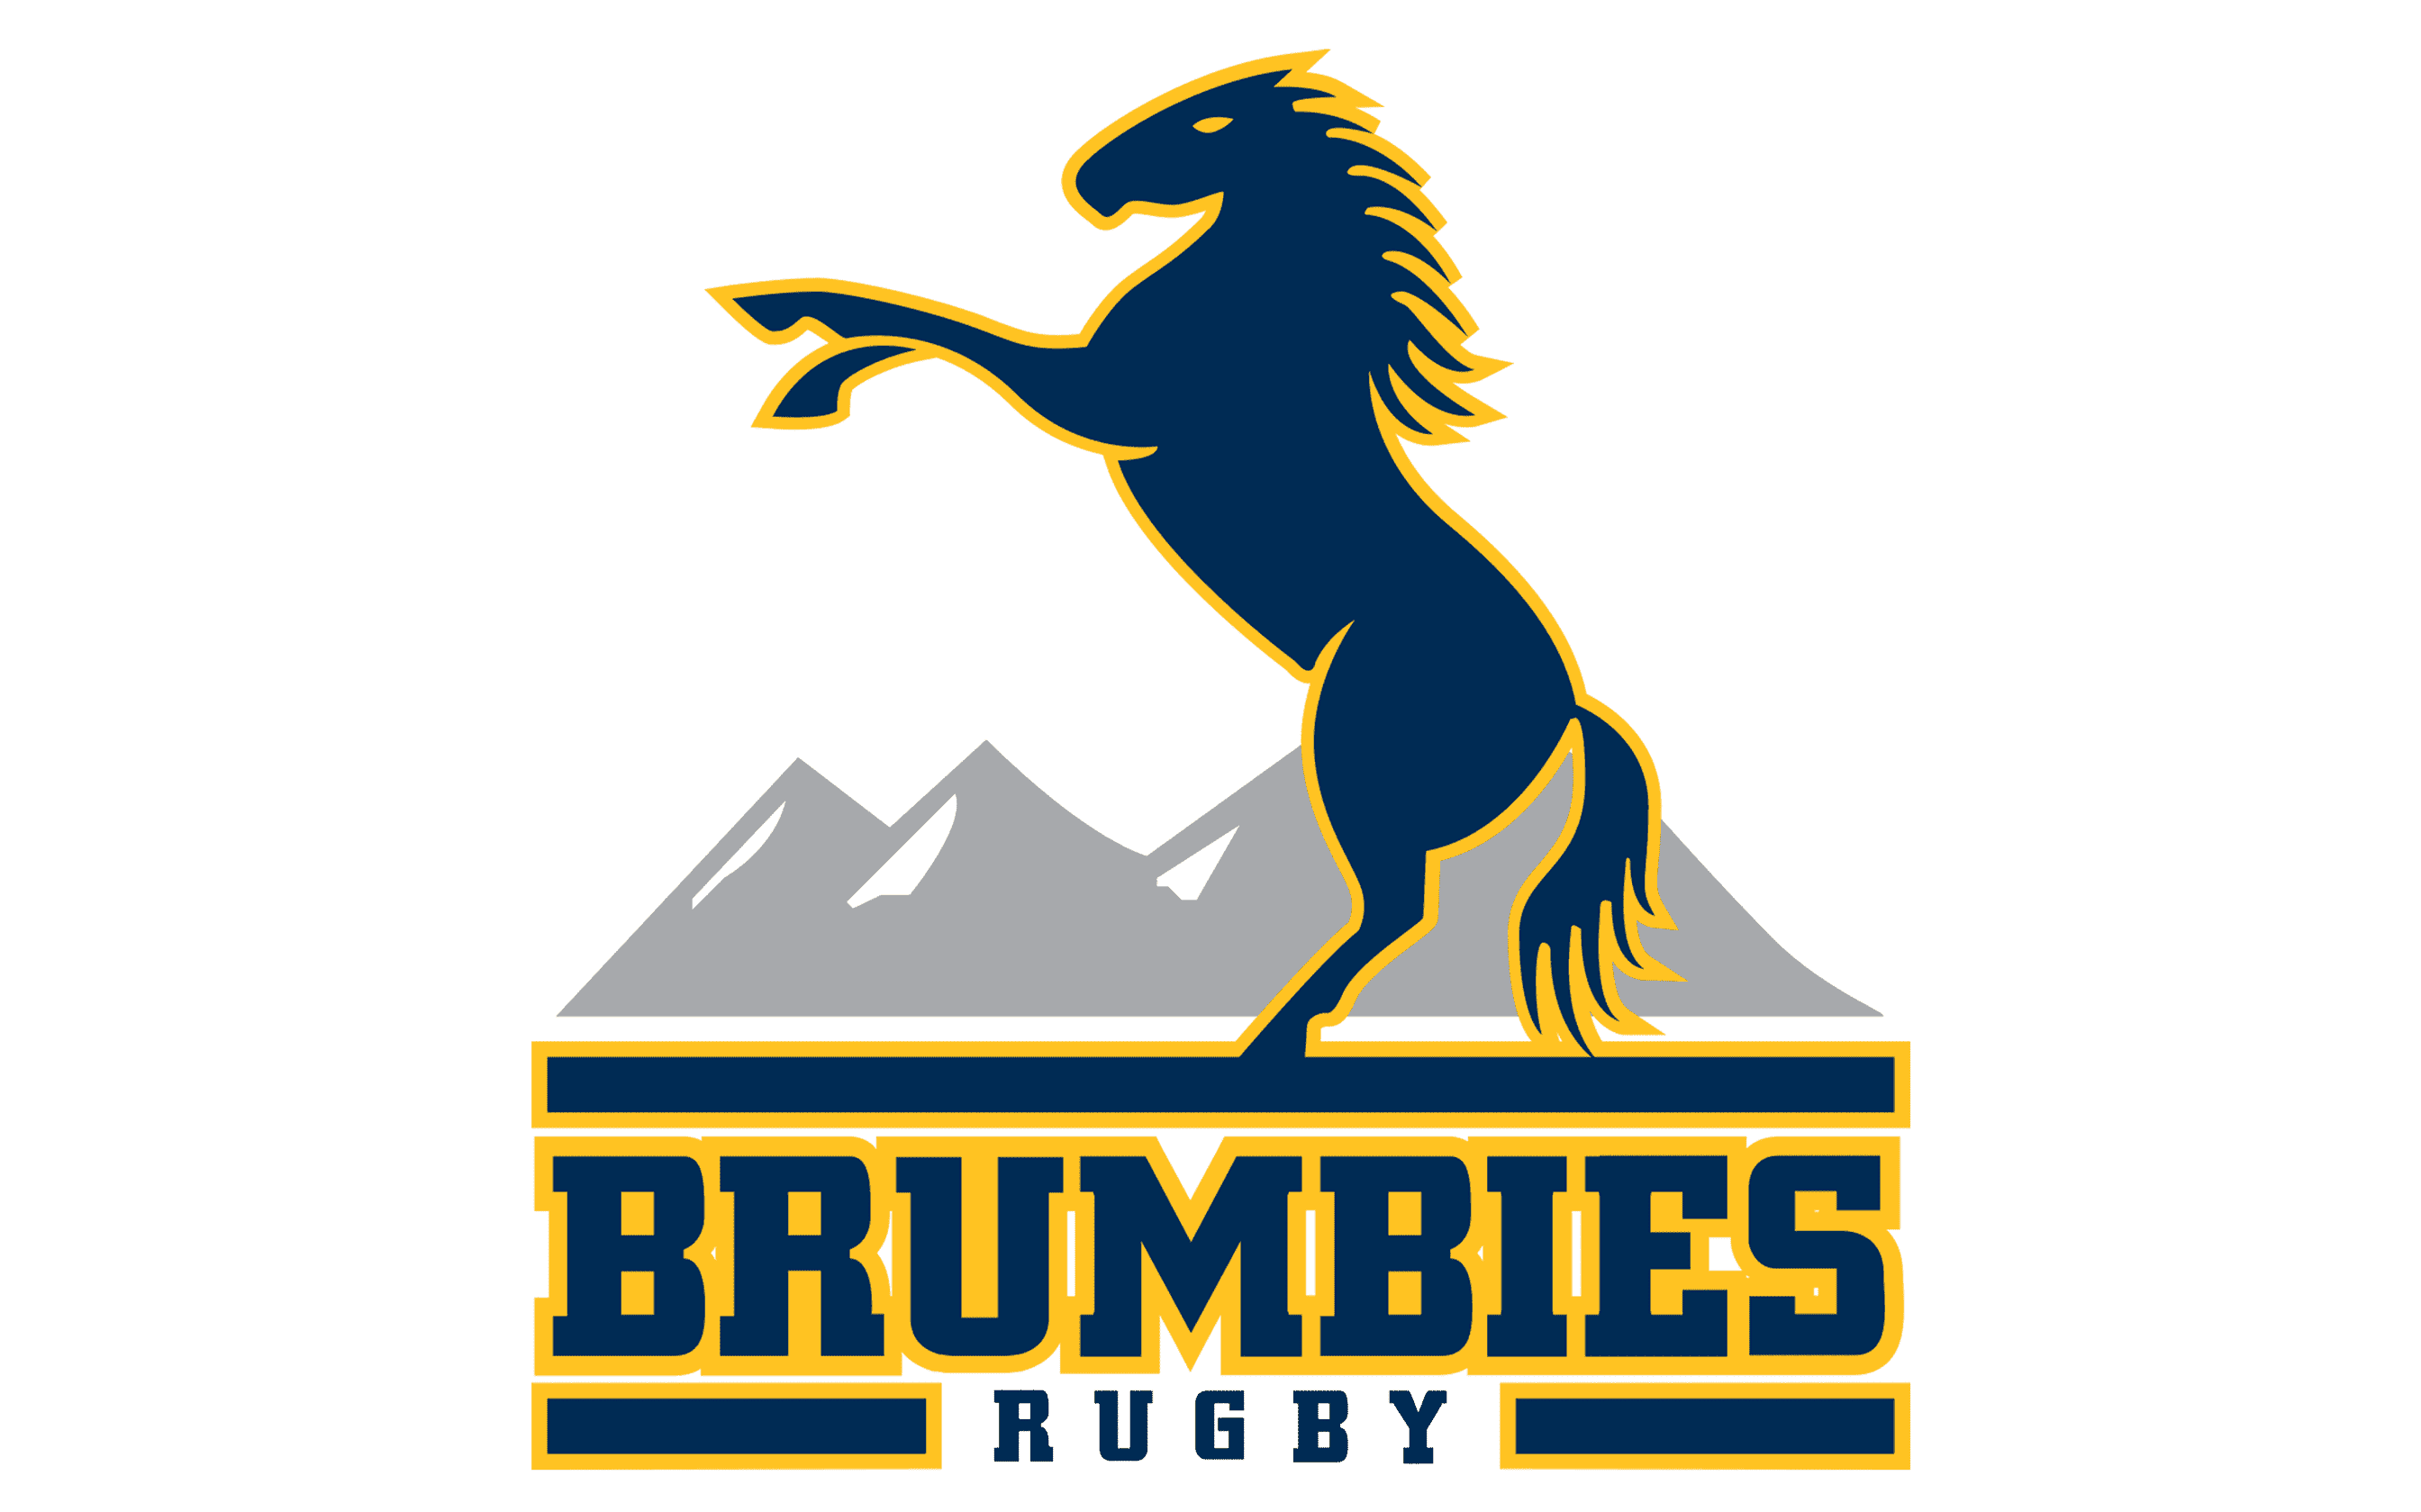 Brumbies Vs Crusaders Live Streaming & Match Replay 2024 | RD-13 Super Rugby Pacific